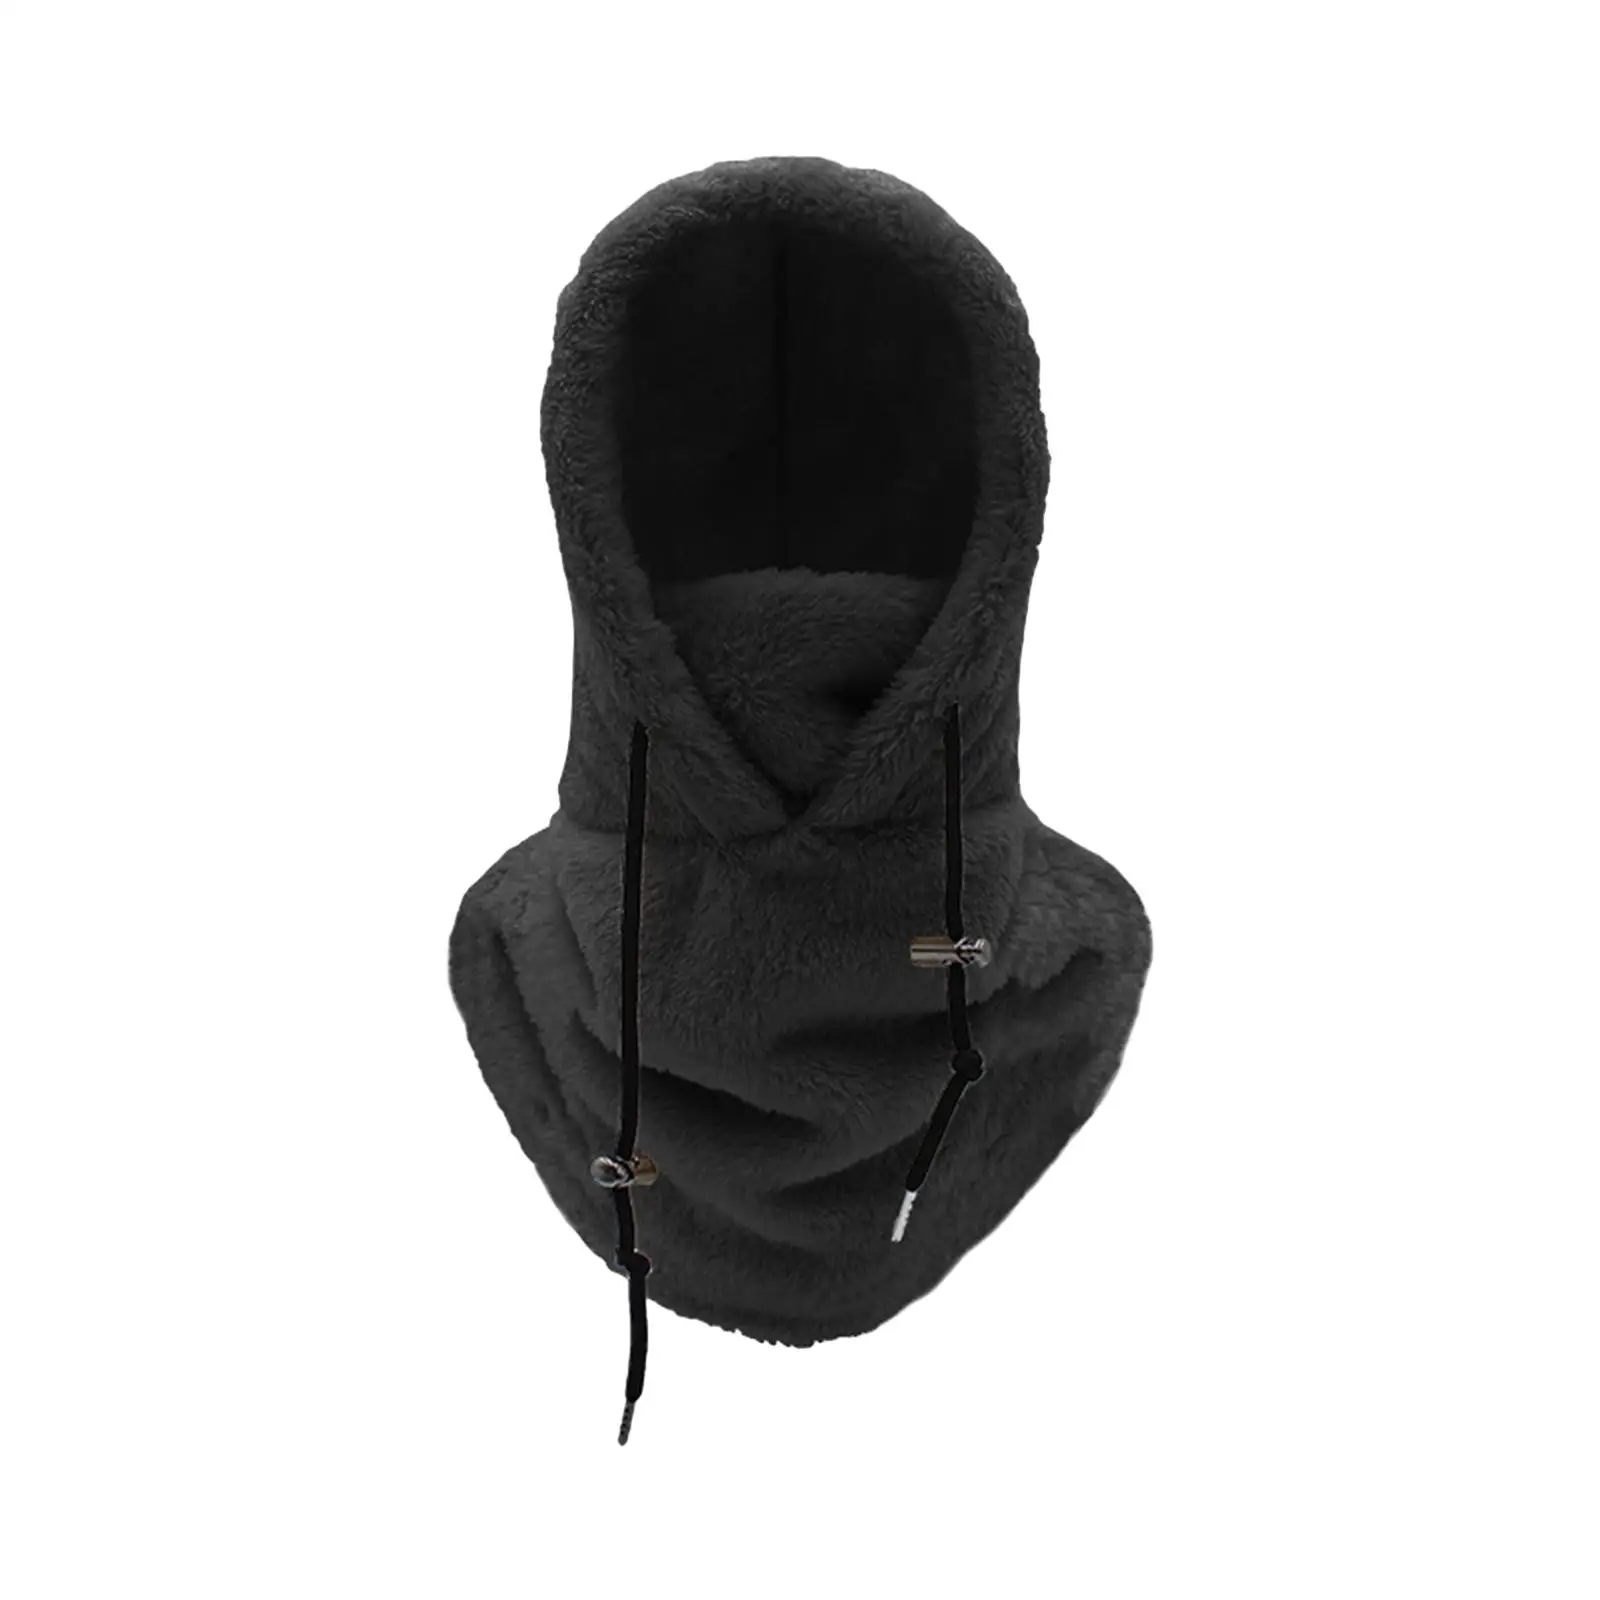 Face Mask Thick Ski Cap Face Cover Neck Warmer Winter Ski Mask Balaclava Hat for Motorcycle Fishing Motorbike Camping Snowboard